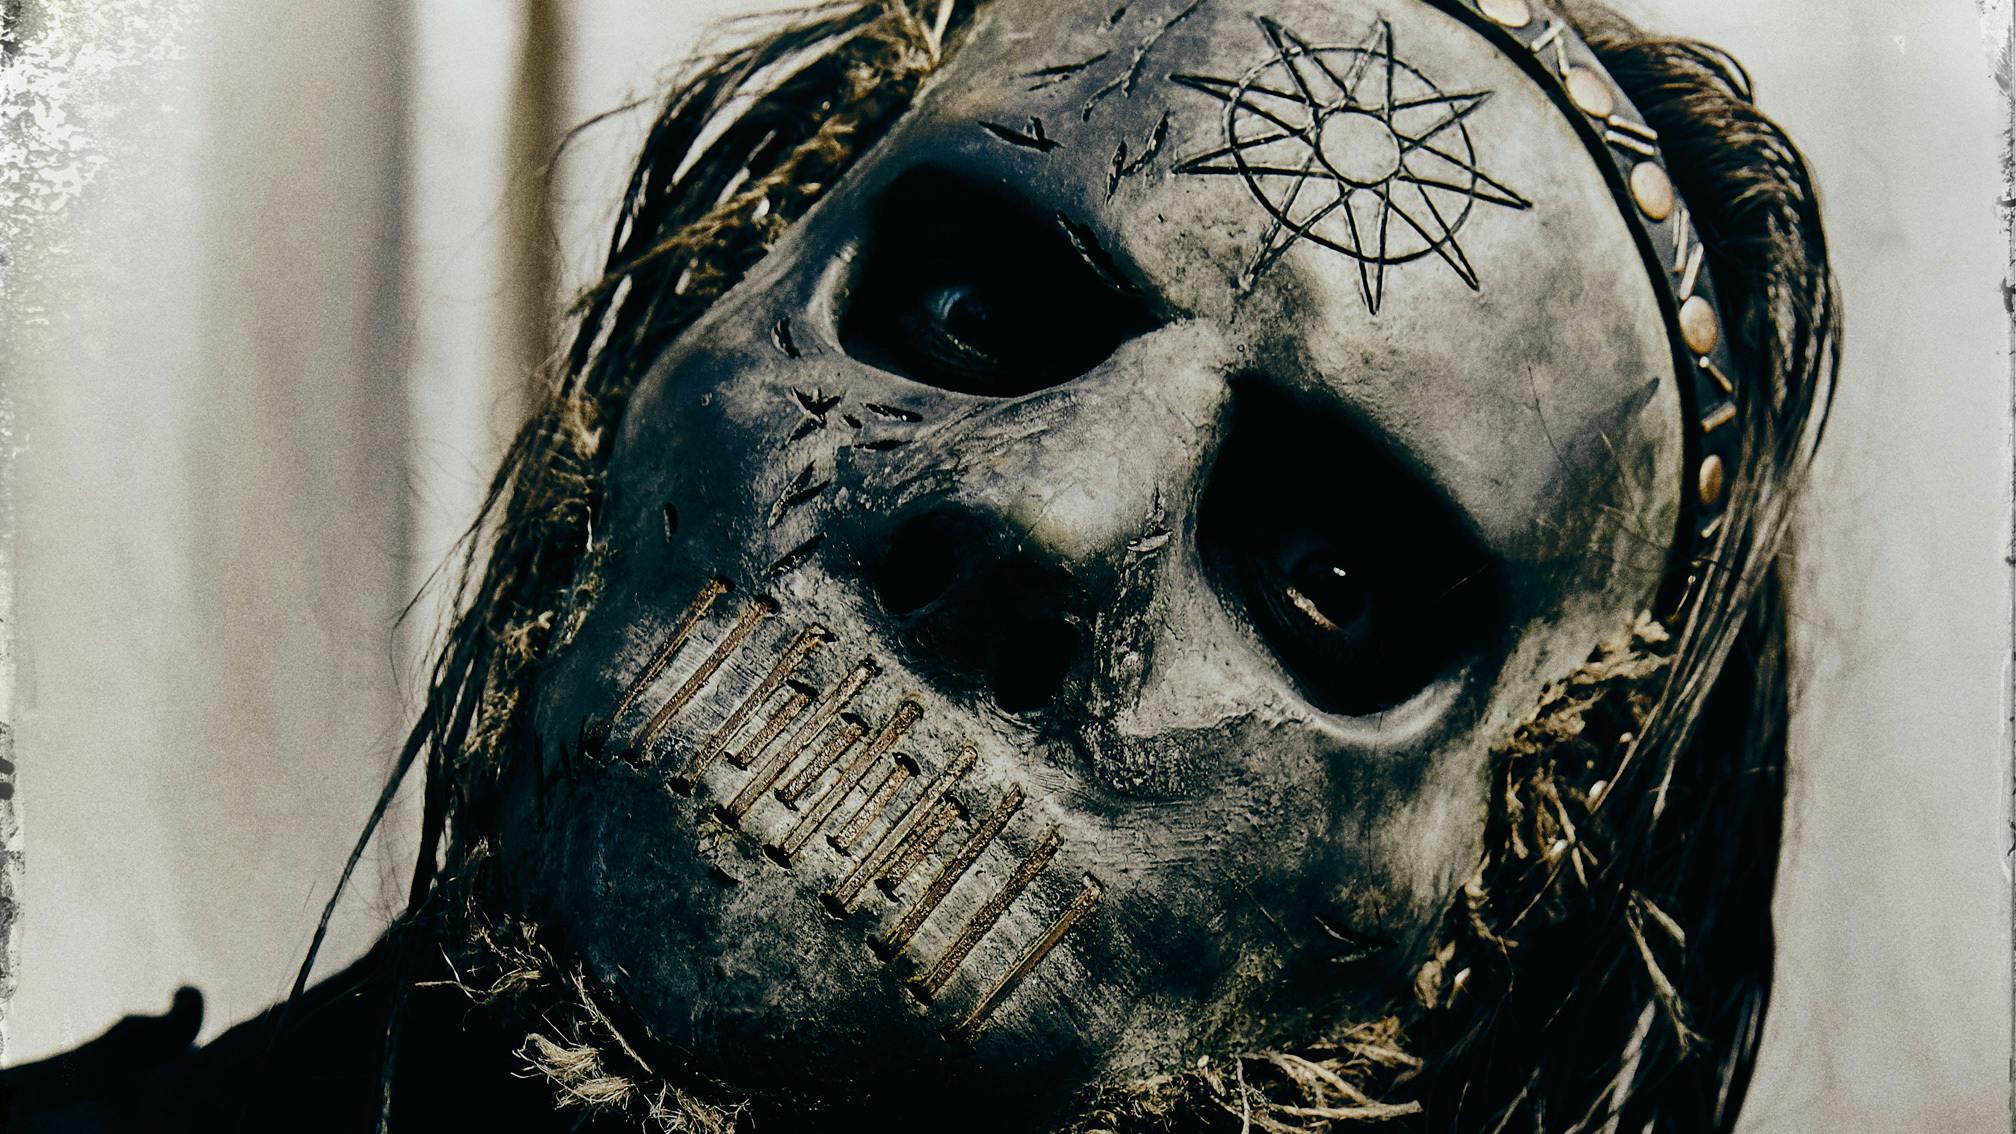 Jay Weinberg says Slipknot “turned up the dials on experimentation” for new album